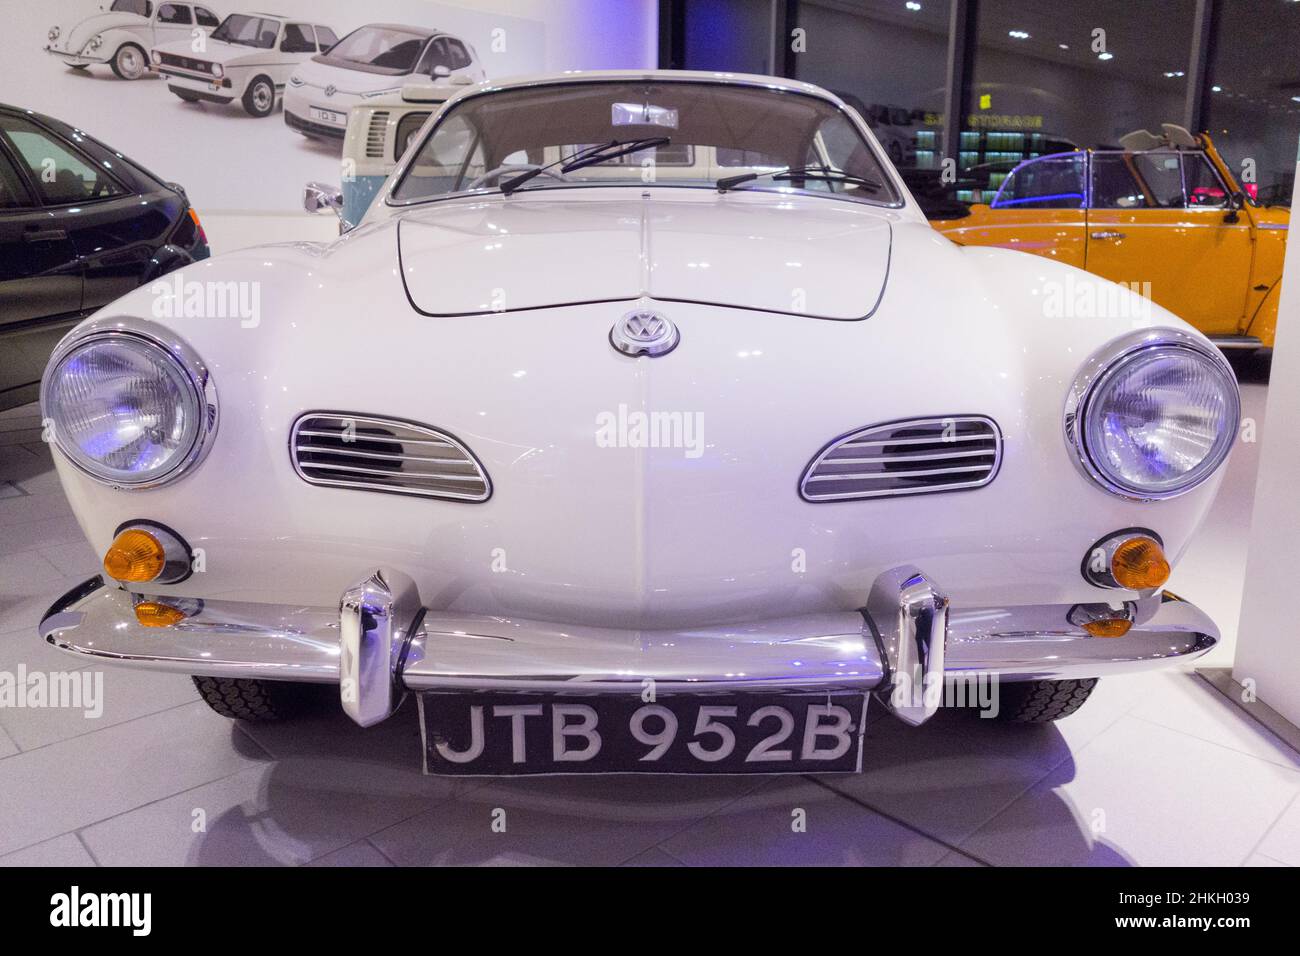 The bonnet and grill of a white Volkswagen Karmann Ghia sports coupé classic car Stock Photo